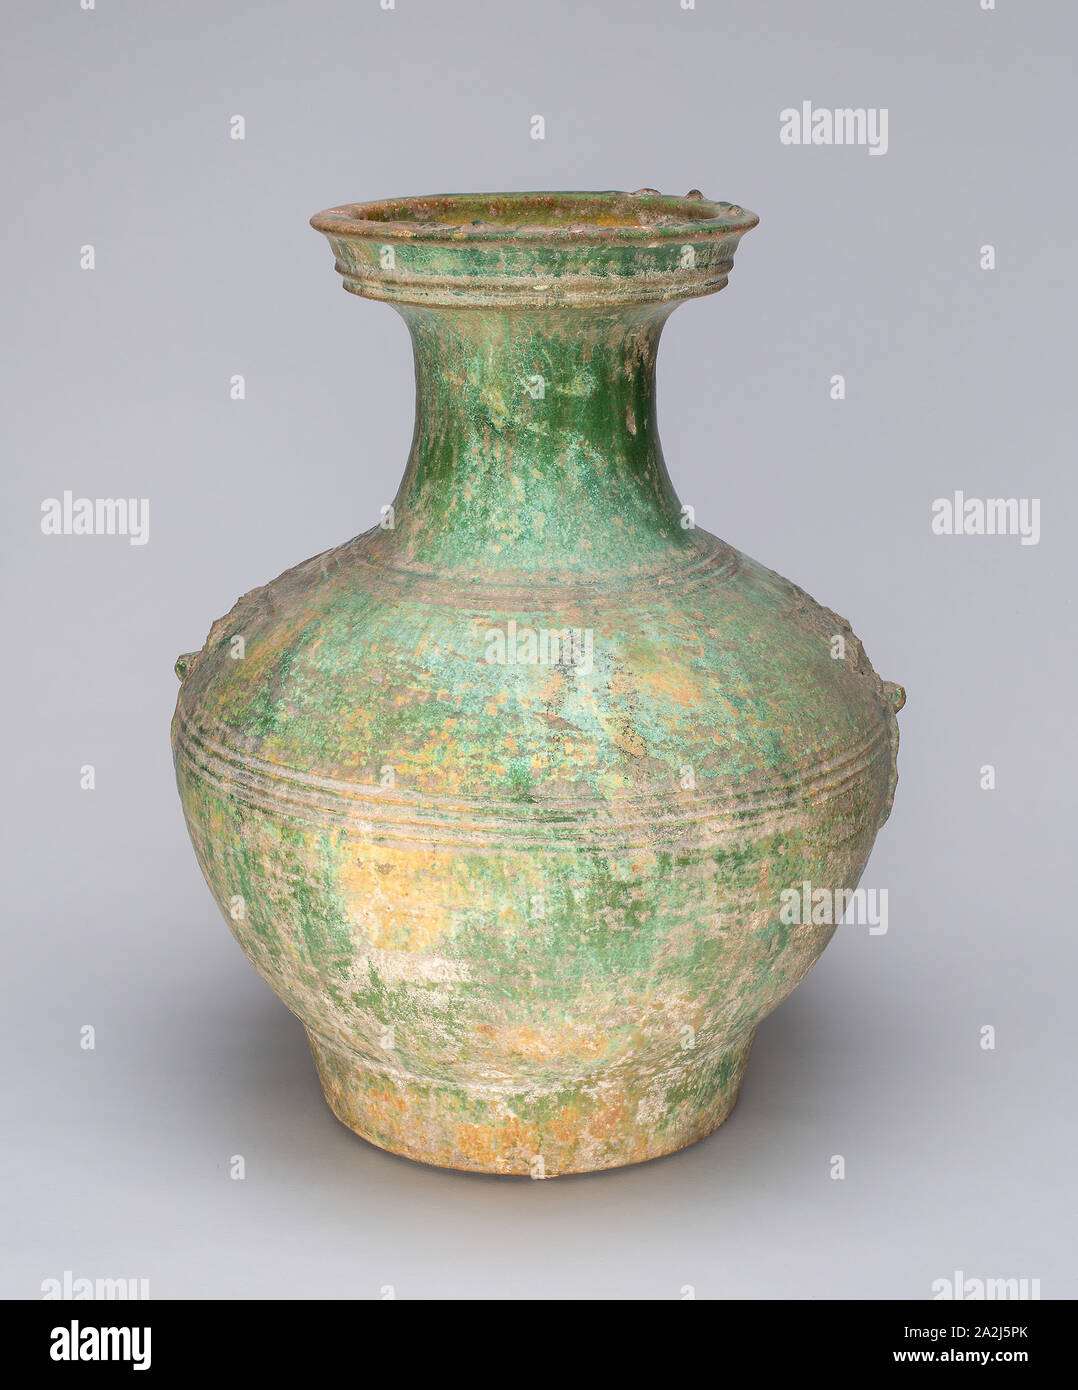 Globular Jar with Mock Ogre Mask Ring Handles, Han dynasty (206 B.C.–A.D. 220), China, Earthenware with underglaze molded decoration and lead green glaze, H. 39.1 cm (15 3/8 in.), diam. 30.7 cm (12 1/8 in Stock Photo